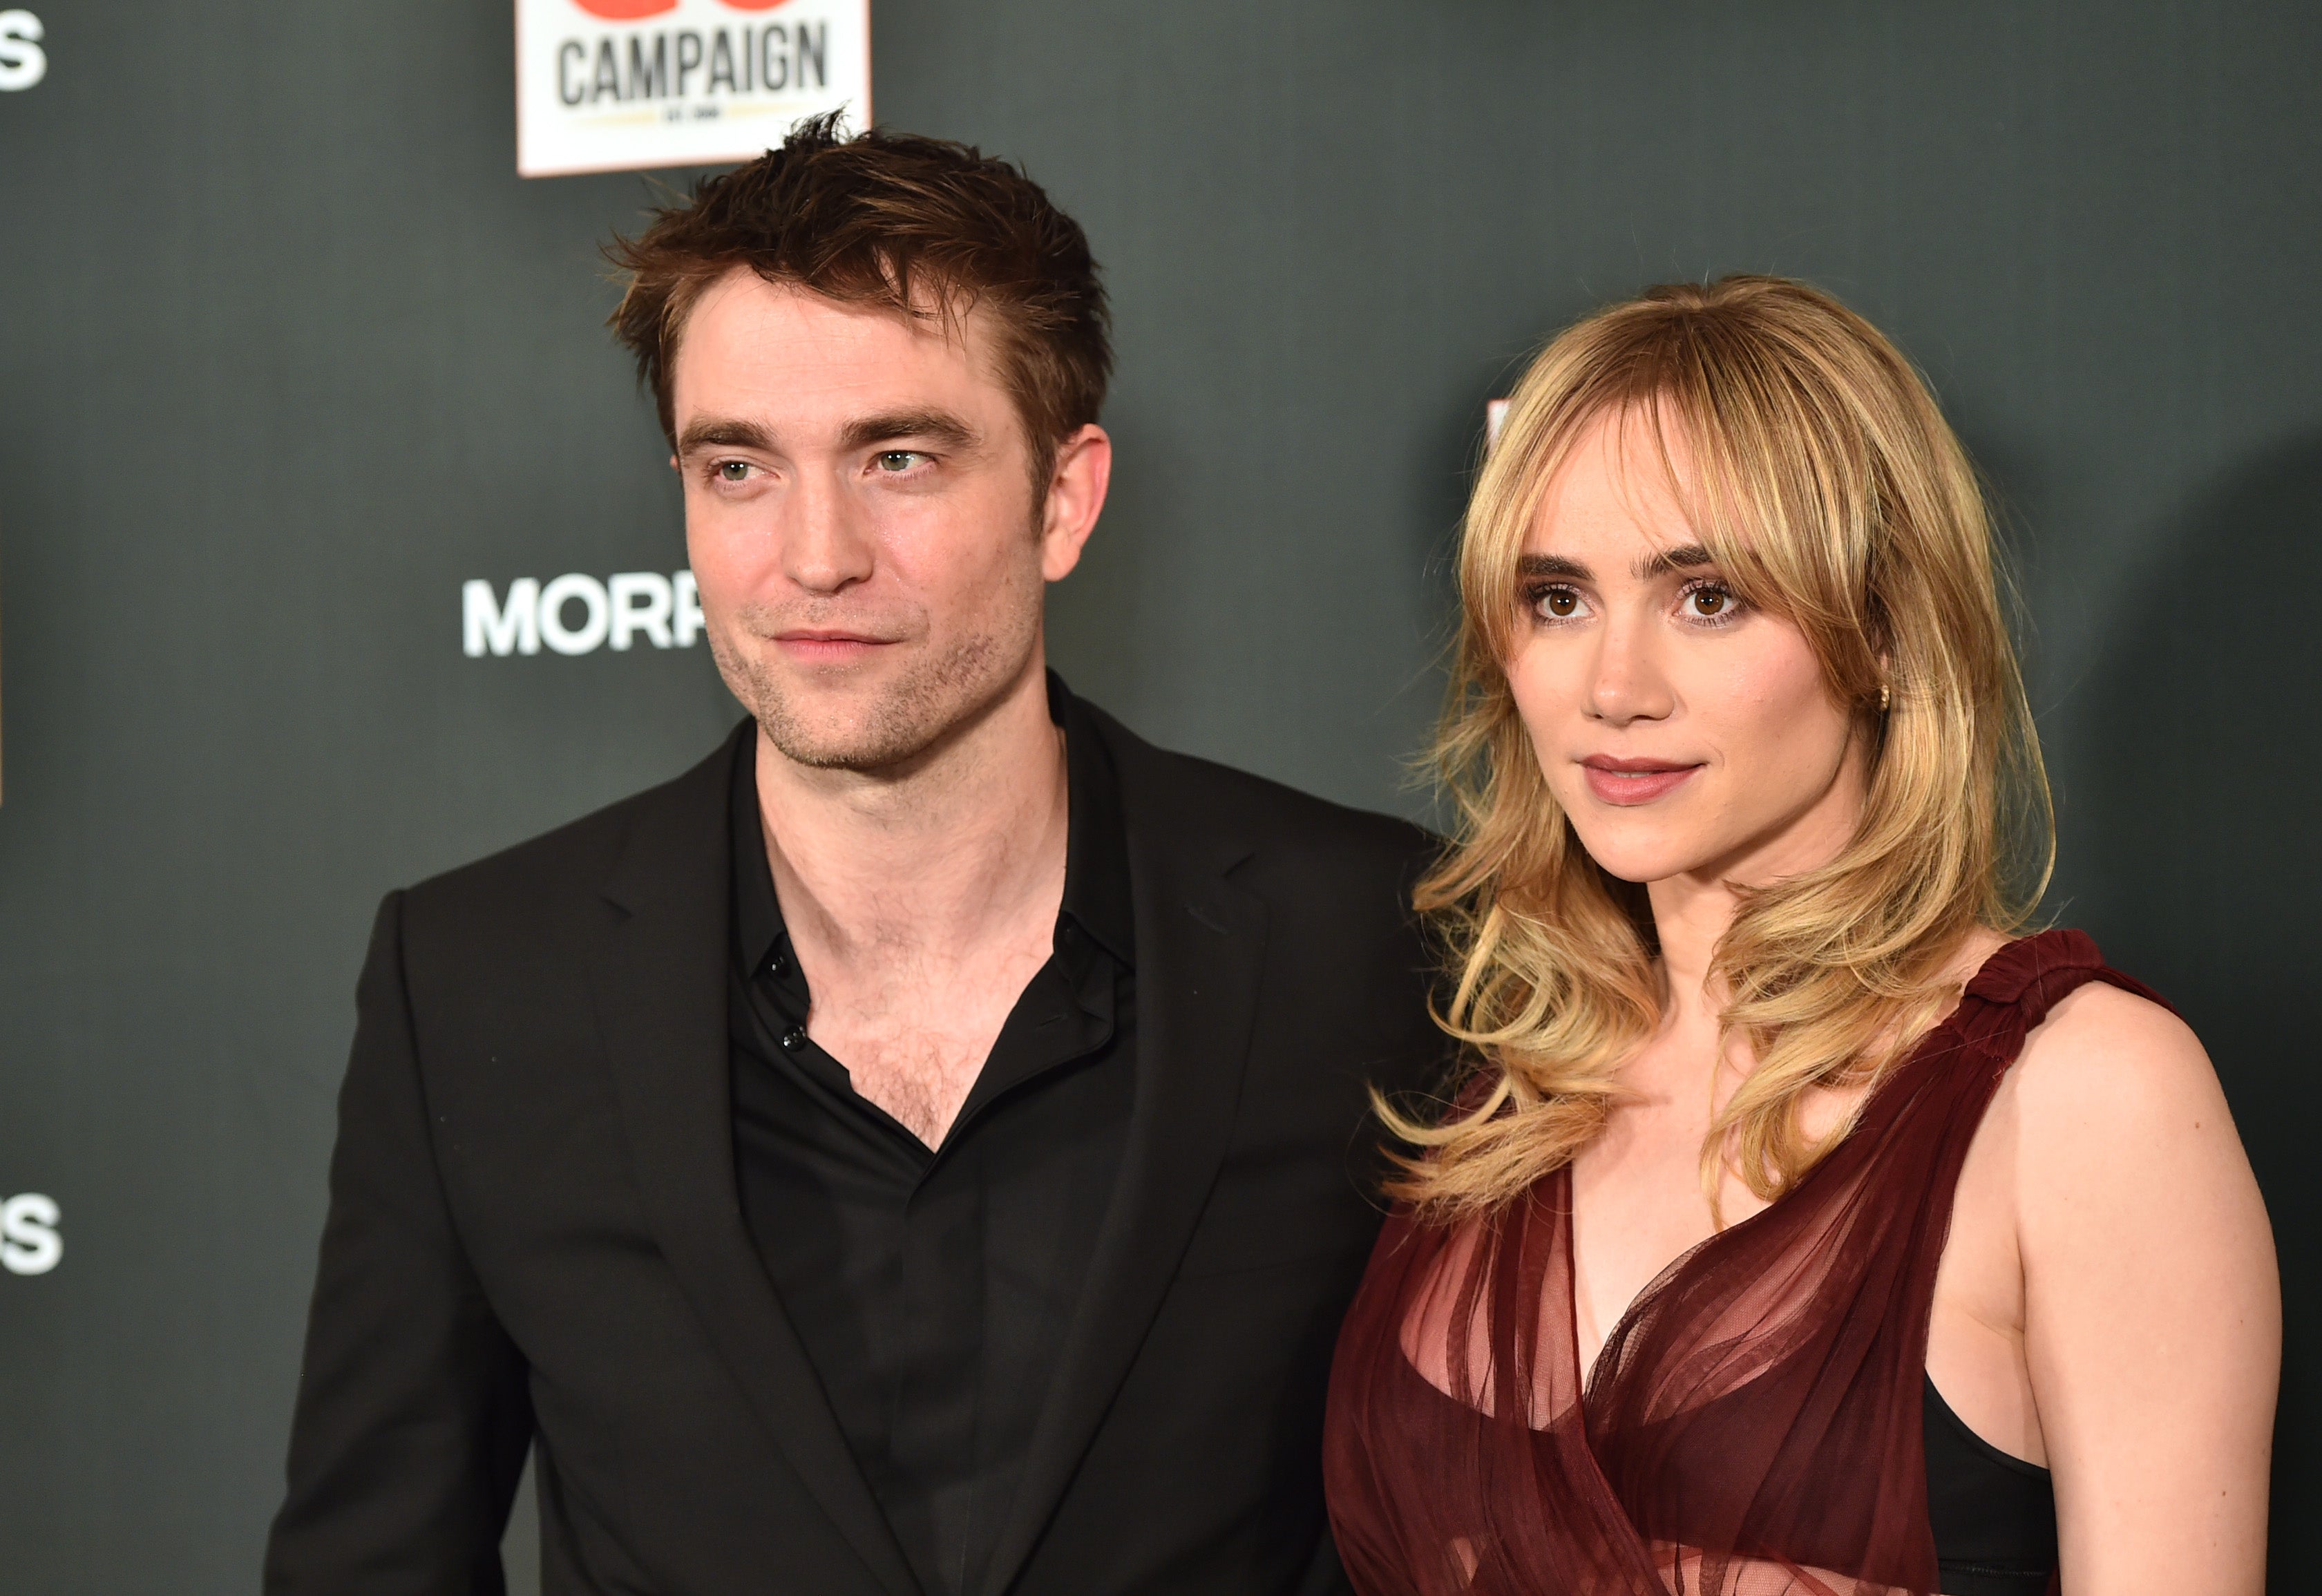 Pattinson and Waterhouse welcomed their child earlier this year